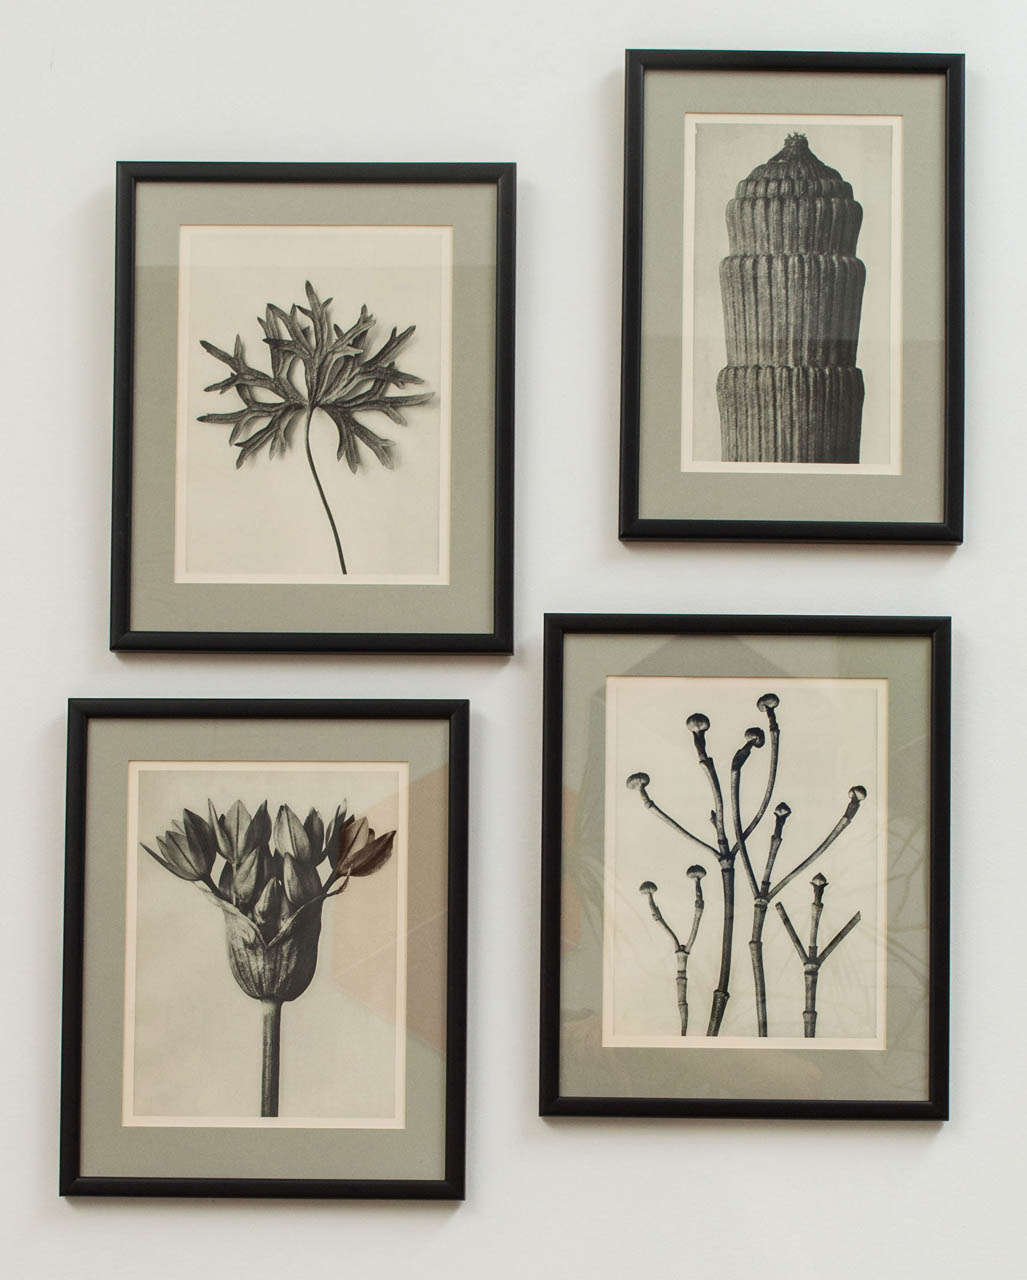 Karl Blossfeldt (June 13, 1865 – December 9, 1932 - age 67) was a German photographer, sculptor, teacher, and artist who worked in Berlin, Germany. He is best known for his close-up photographs of plants and living things.he was inspired by nature